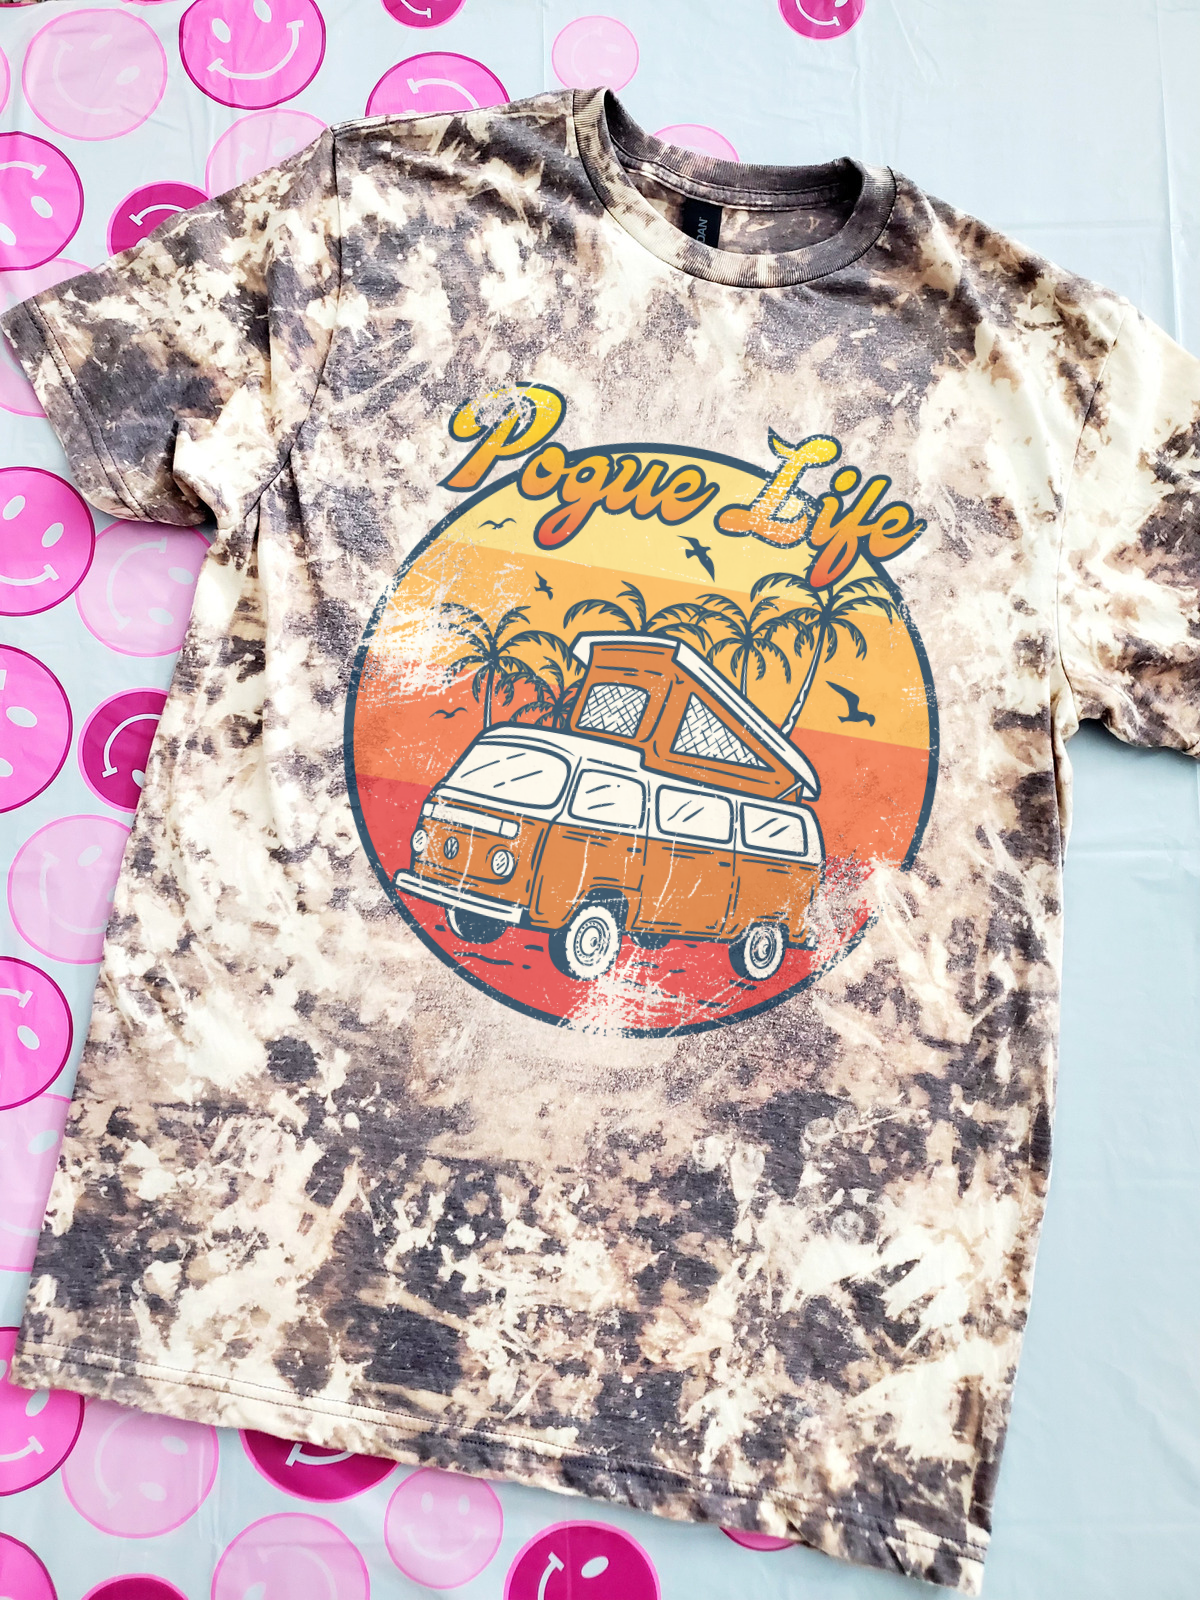 Outer Banks Bleached Tee